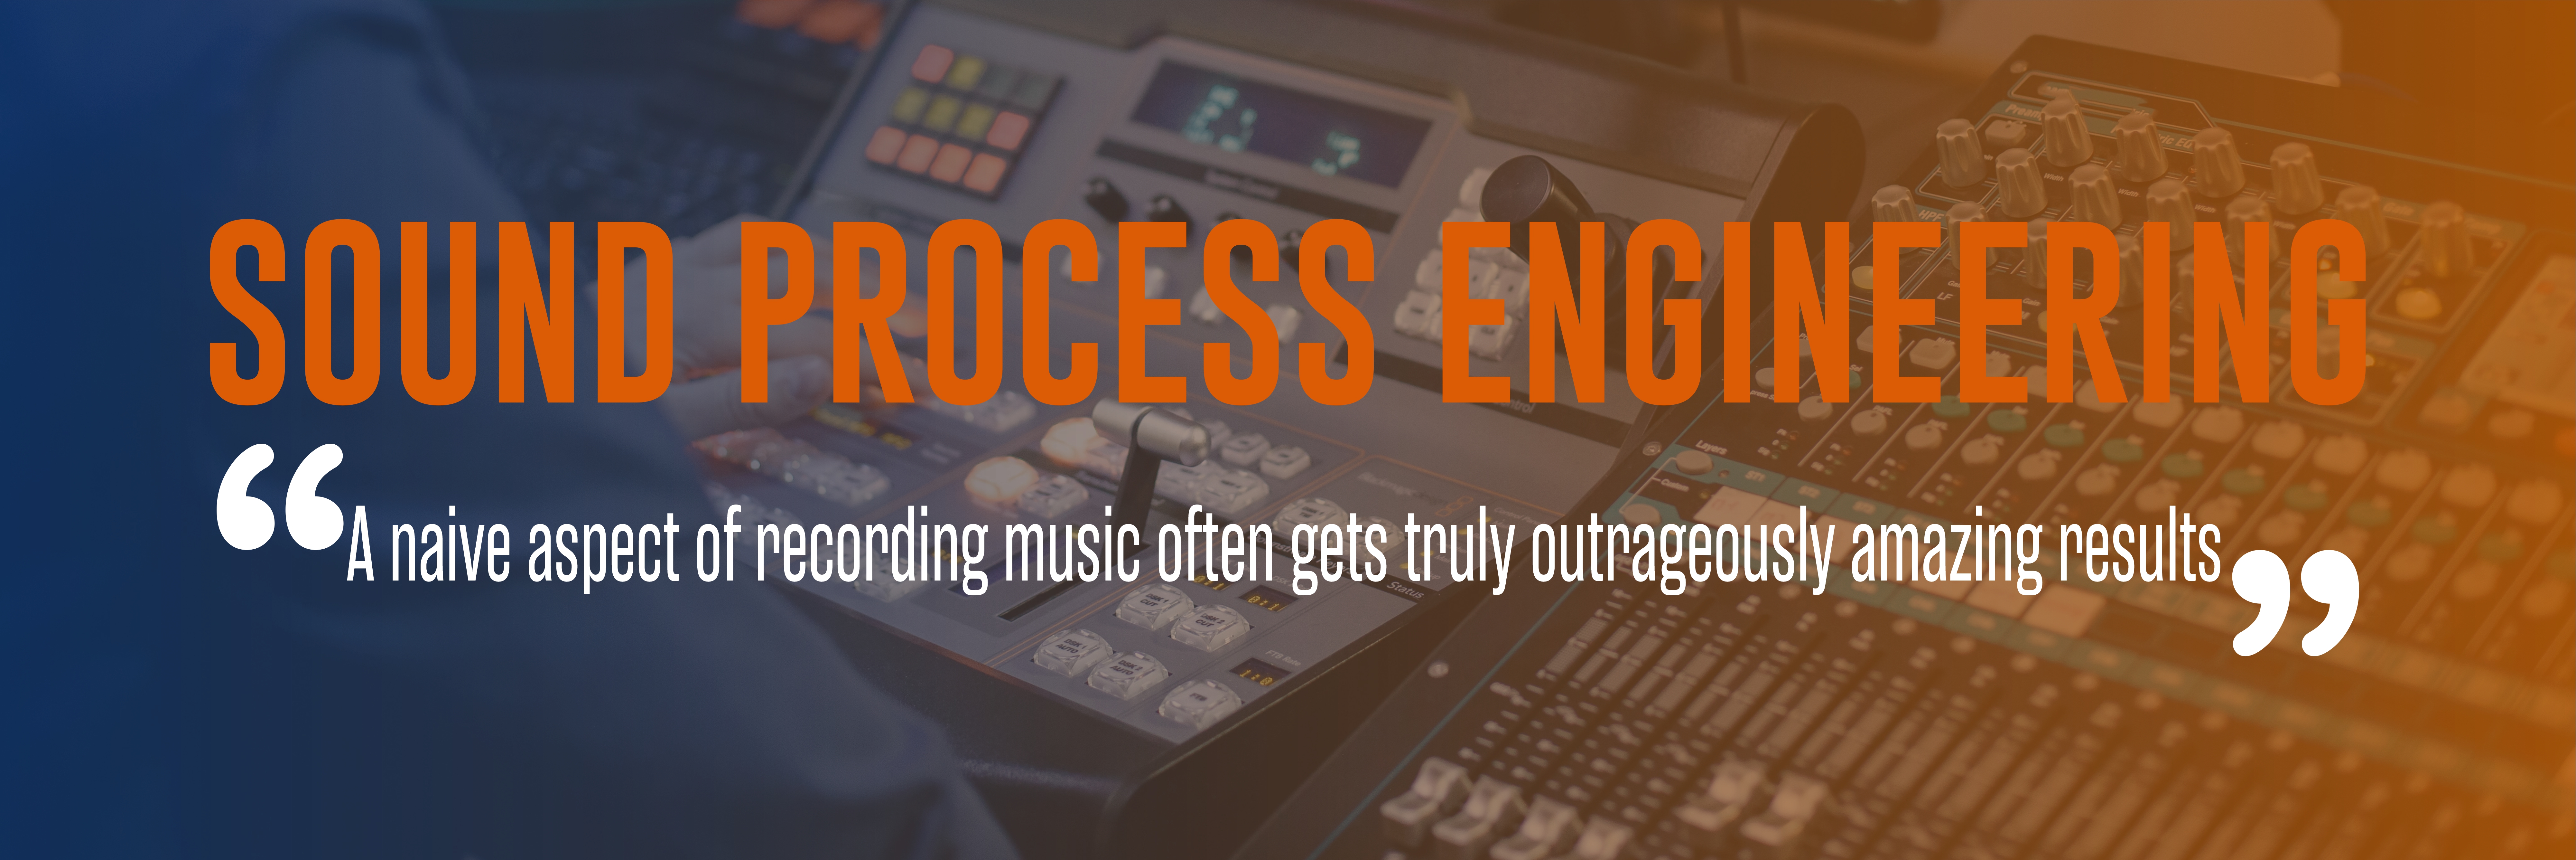 Bsc Sound Process Engineering